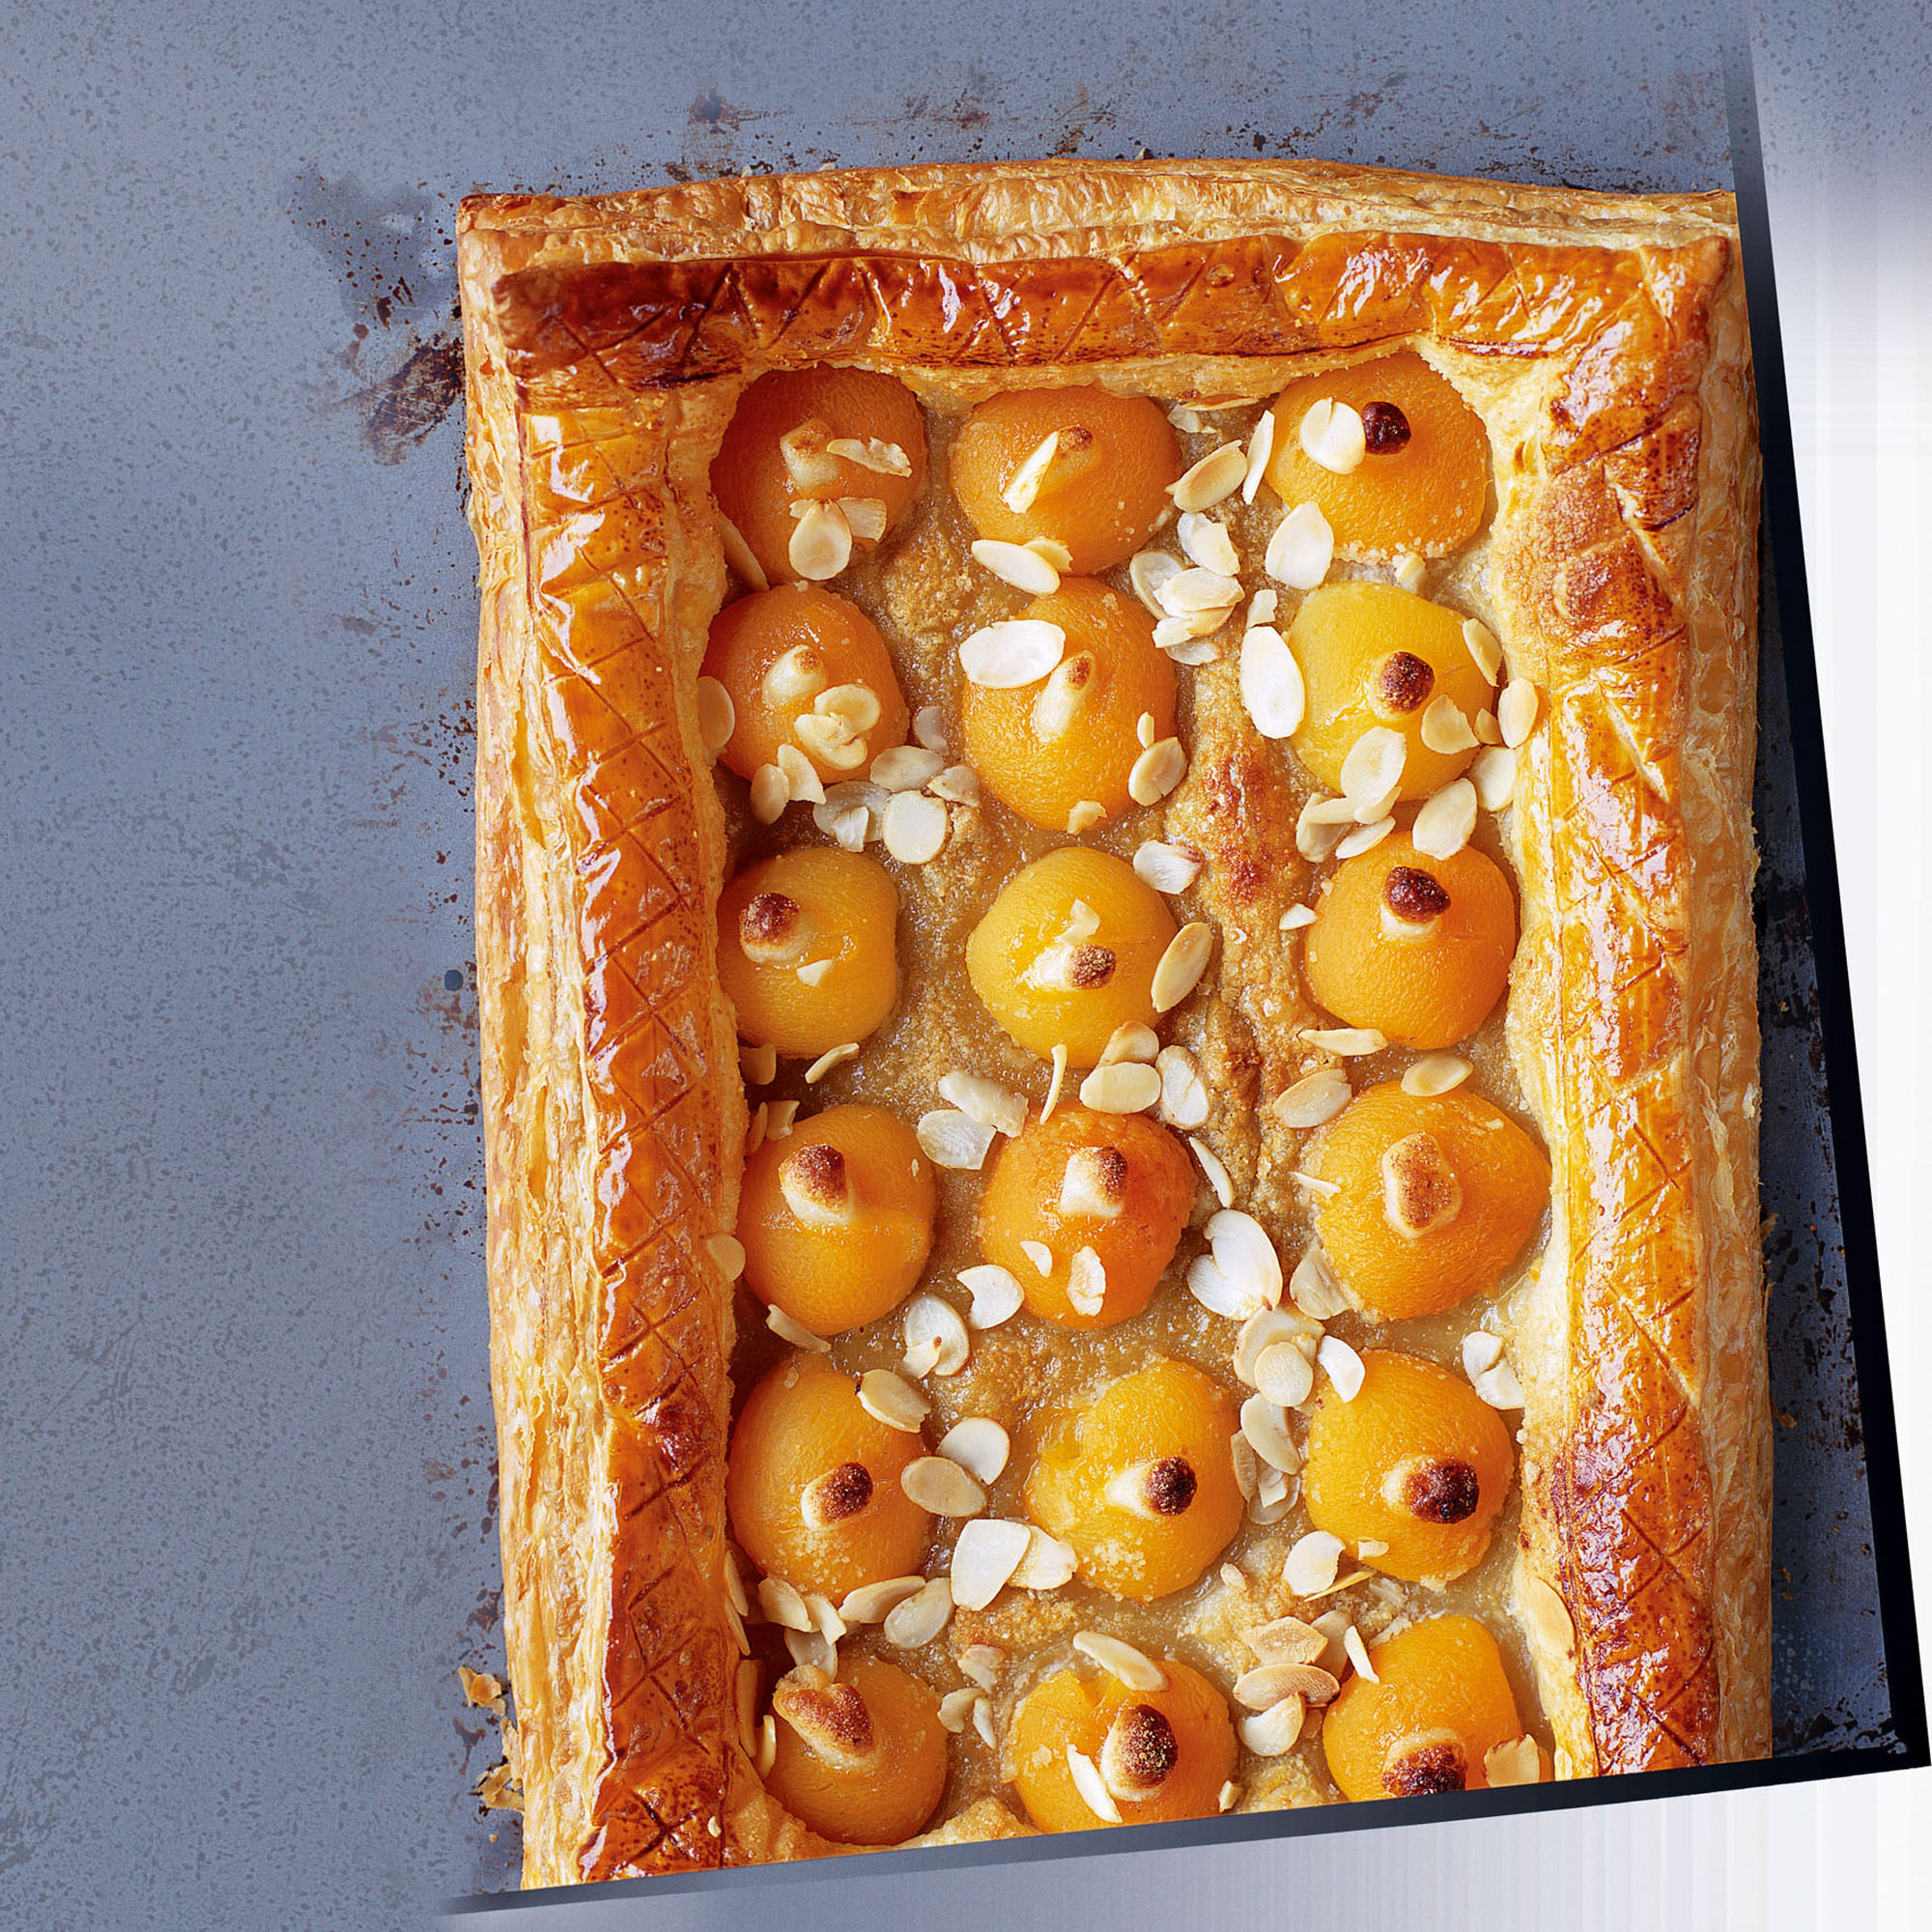 Apricot and almond galette recipe